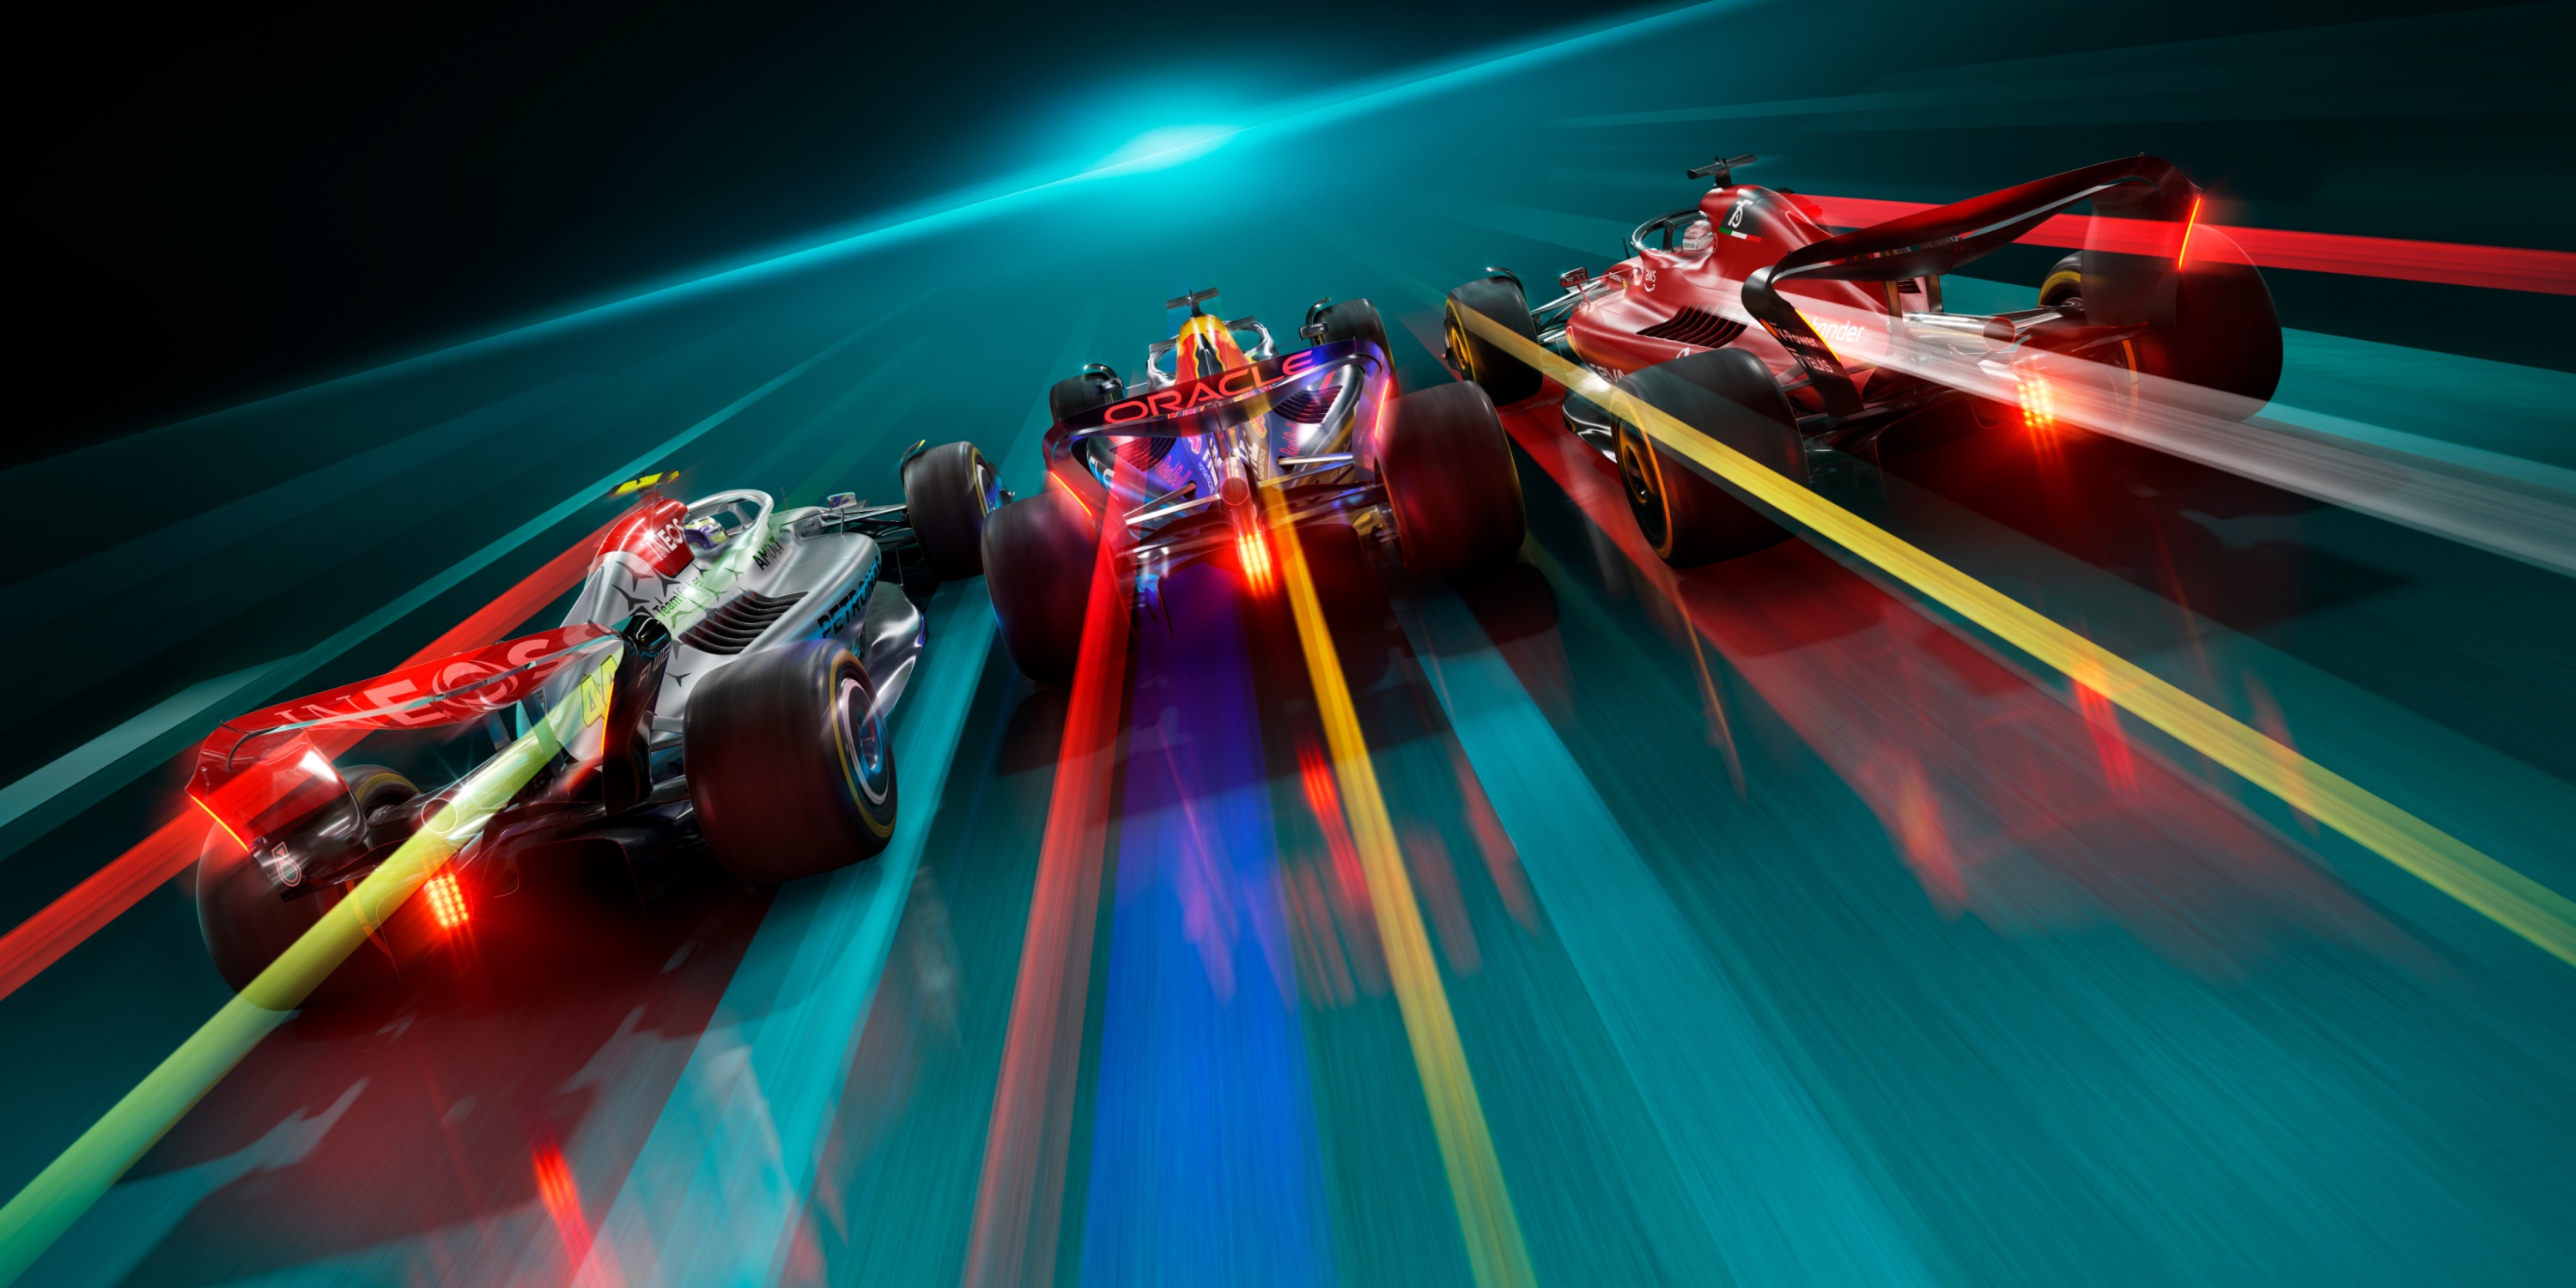 Watch F1 Online - Live Stream to any Device